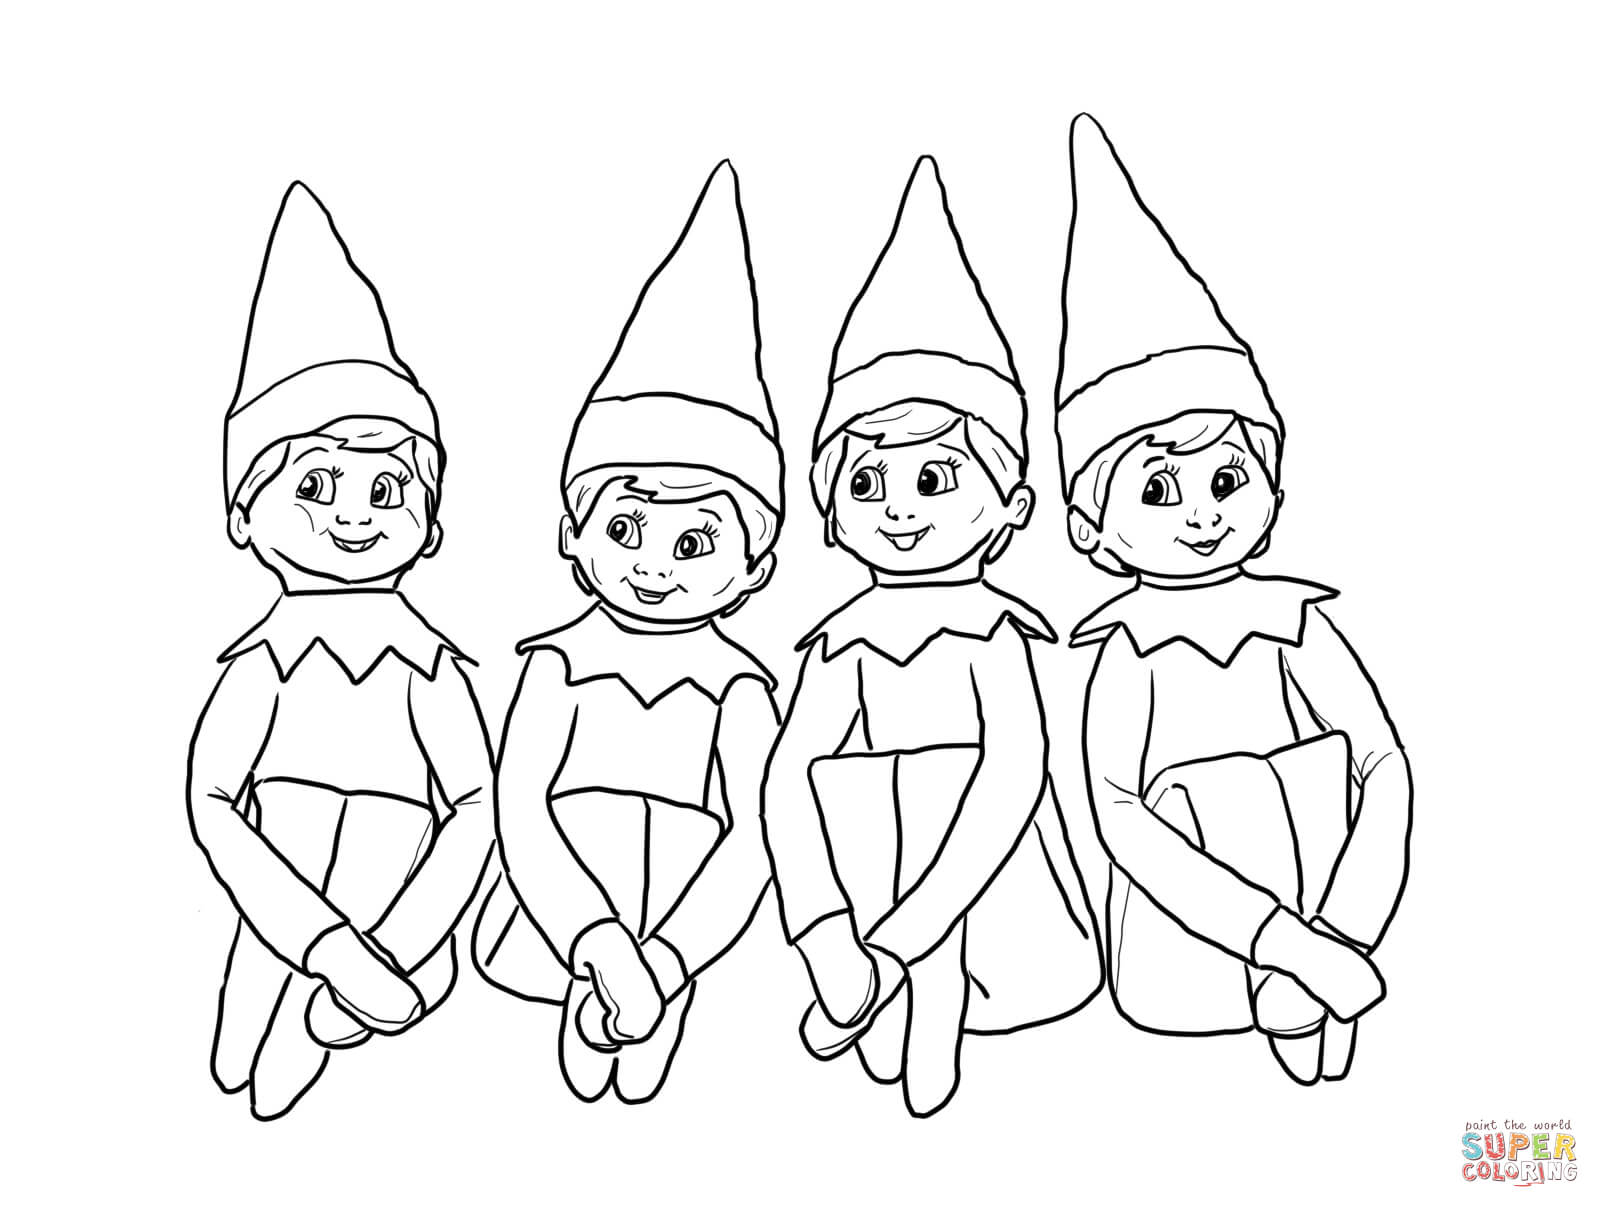 Christmas Coloring Pages Boy Elf On The Shelf - Coloring Pages For ...